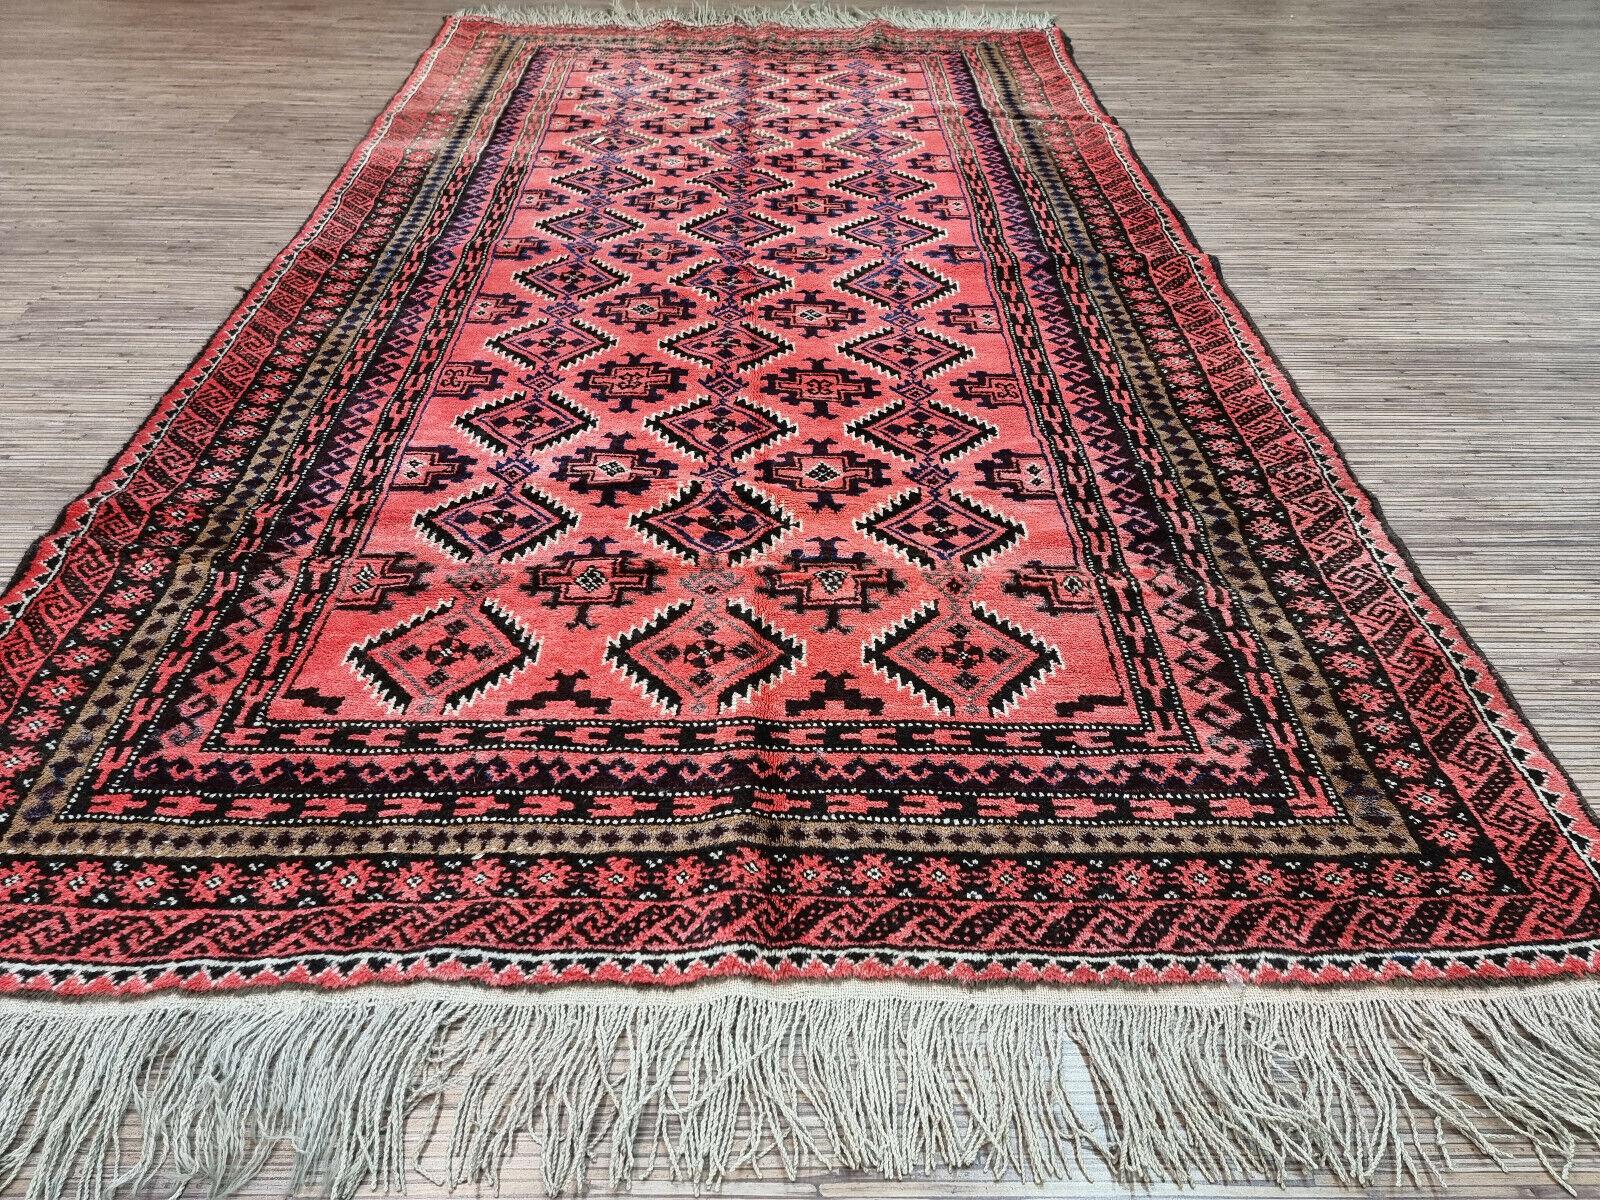 Hand-Knotted Handmade Vintage Afghan Baluch Prayer Rug 2.4' x 4.7', 1960s - 1D94 For Sale